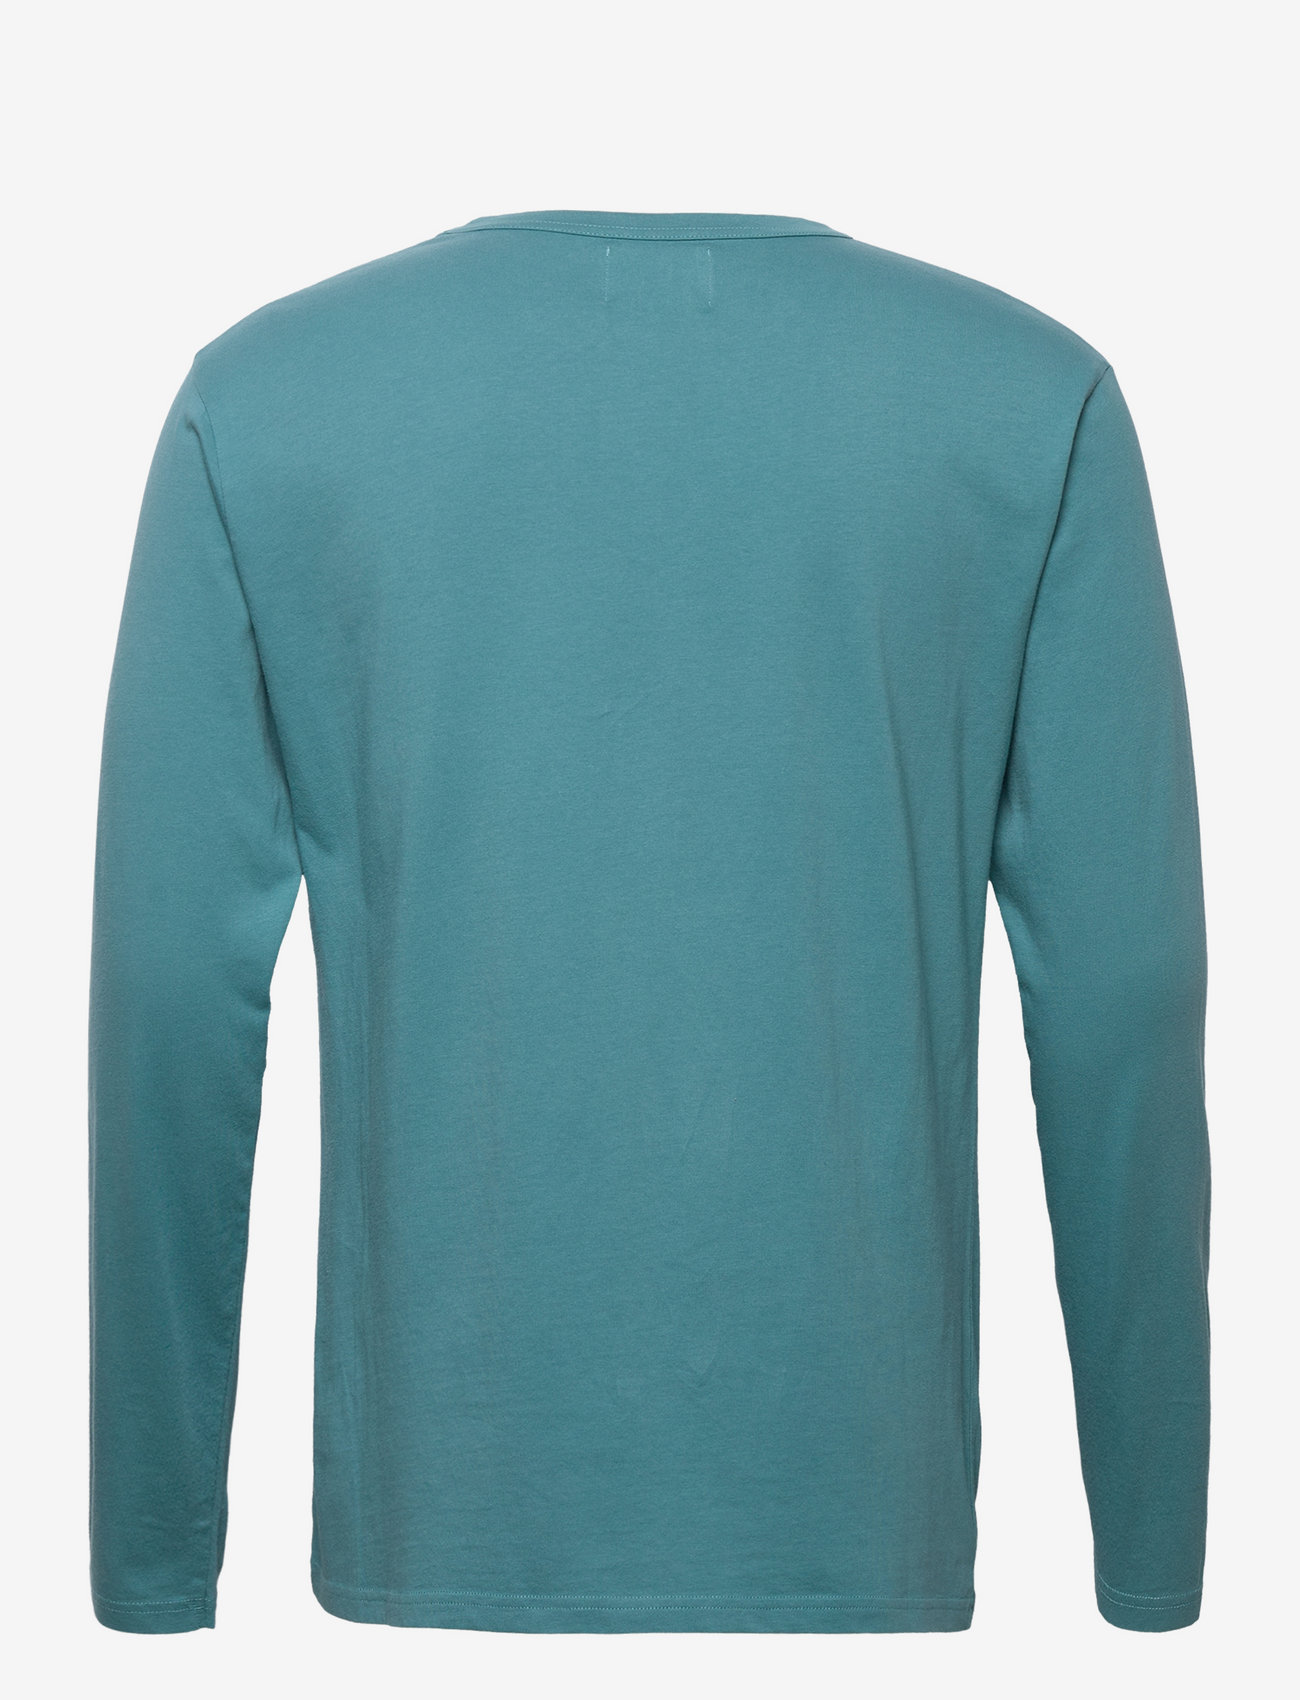 Double A by Wood Wood - Mel long sleeve - t-shirts - teal - 1